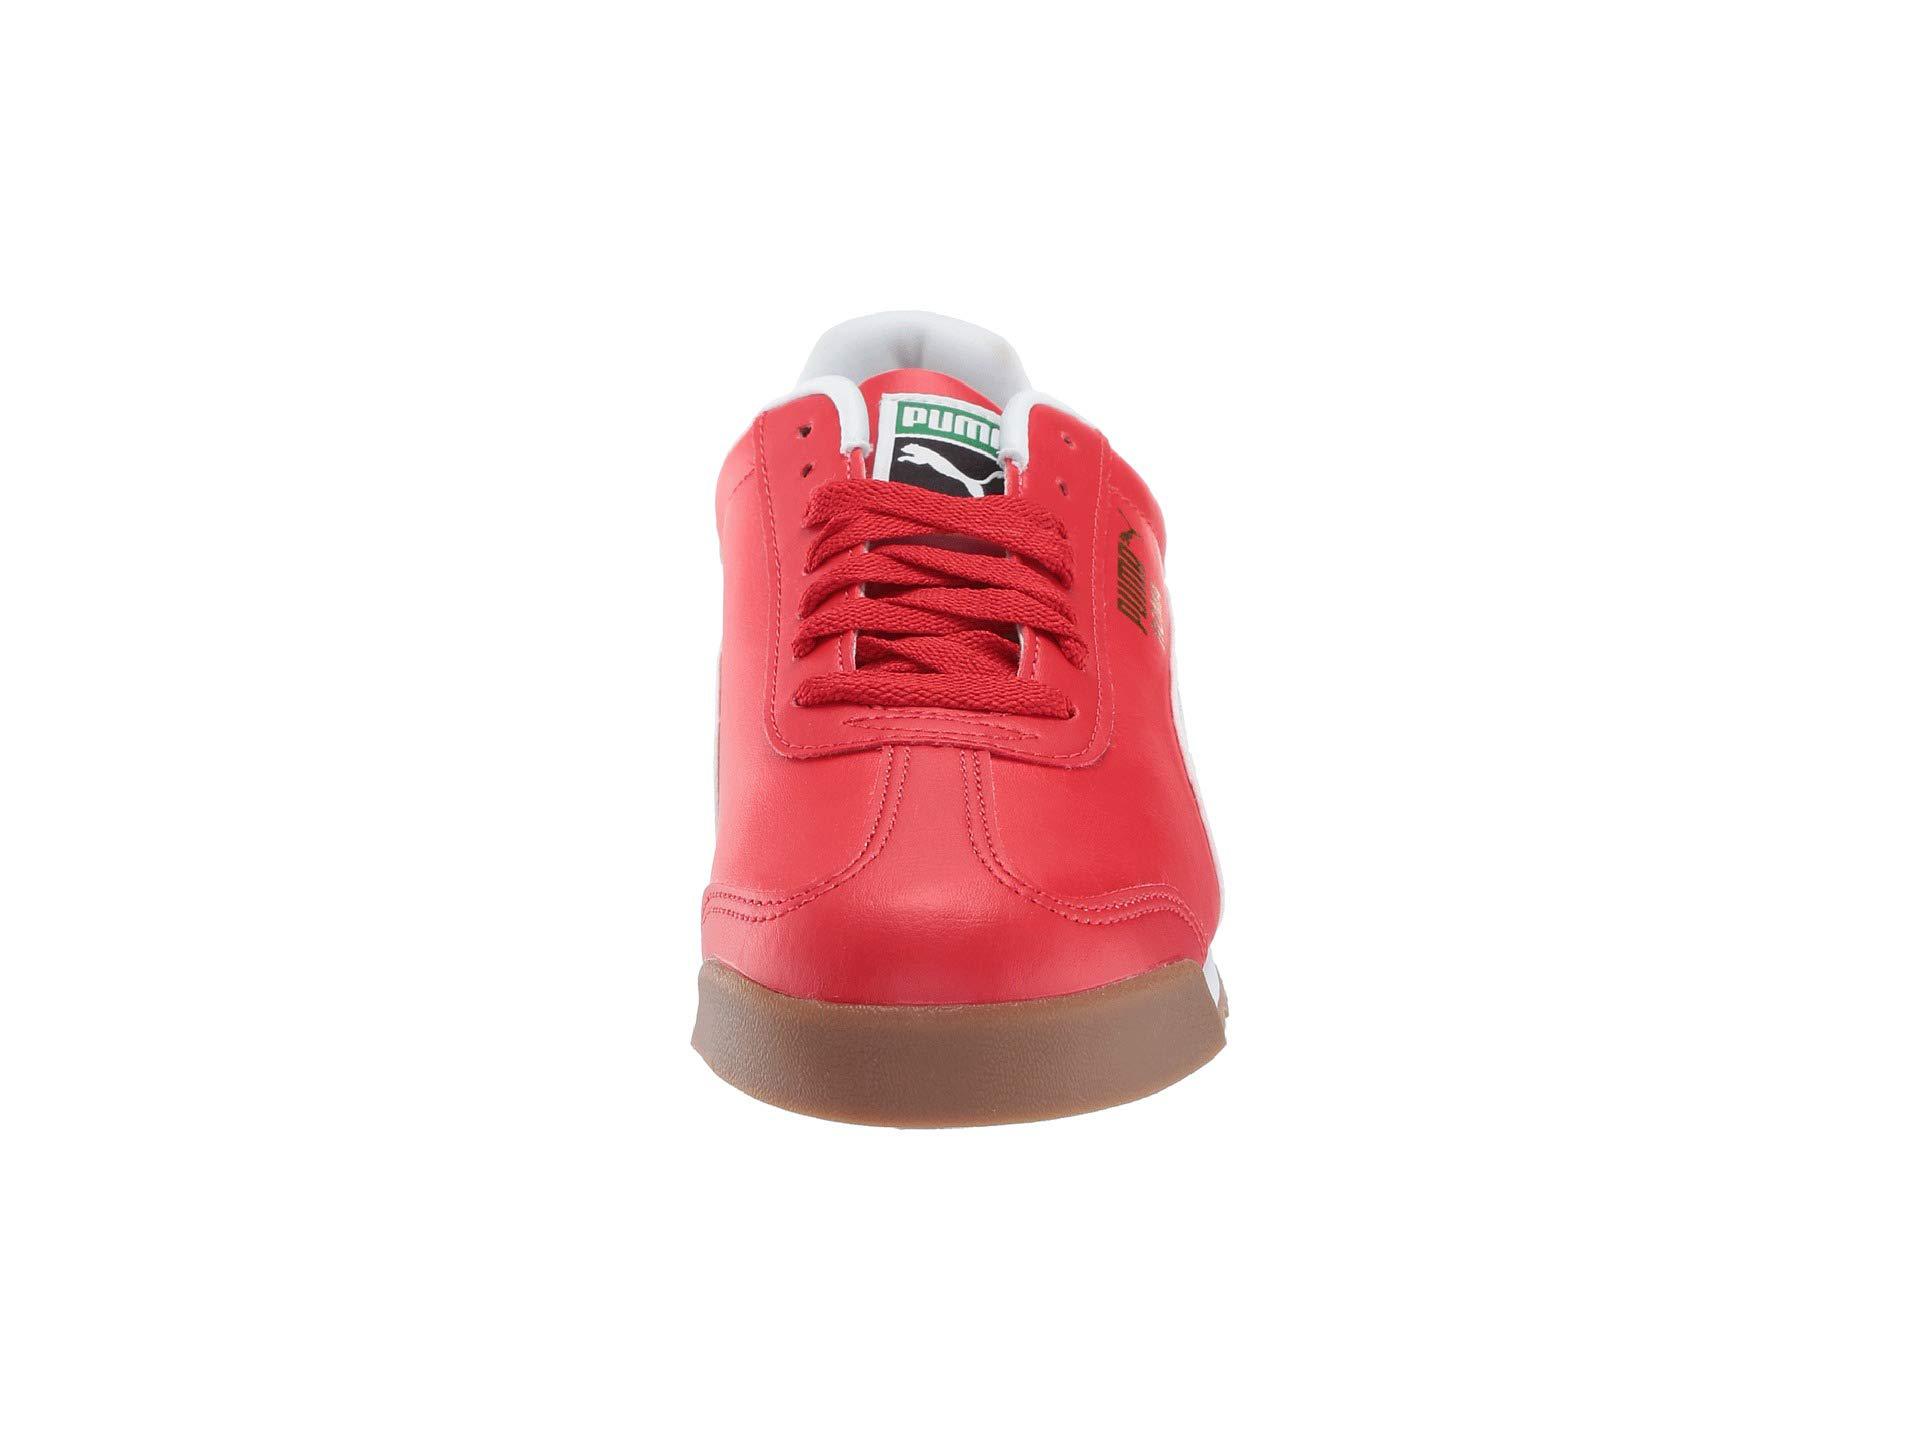 PUMA Roma Basic Sneaker in Red for Men - Save 29% | Lyst